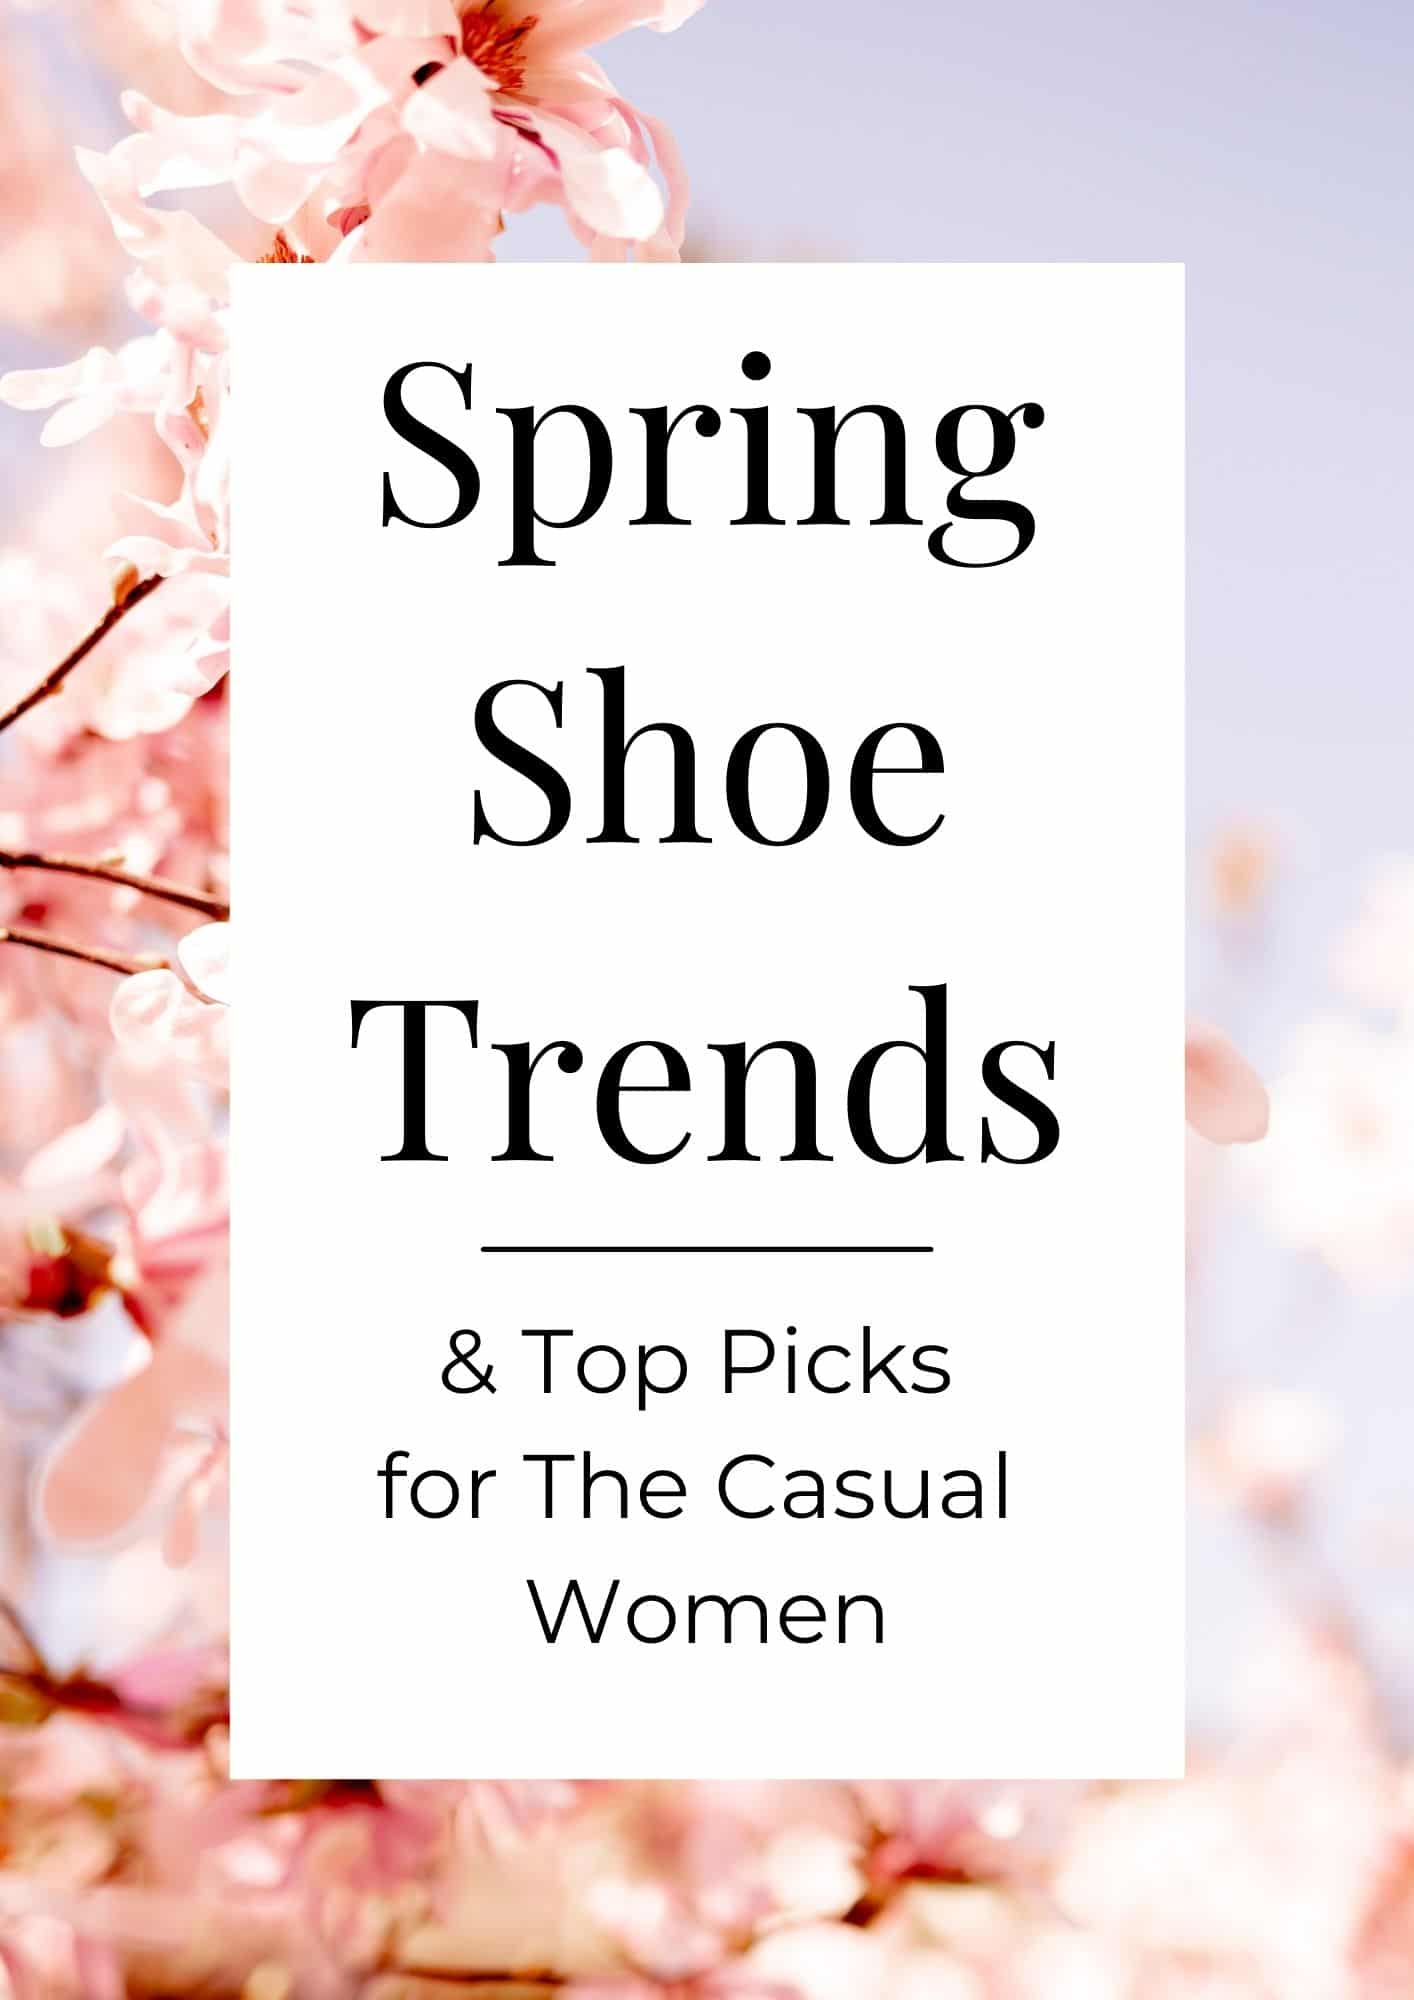 Spring Shoe Trends & Top Picks for the Casual Women